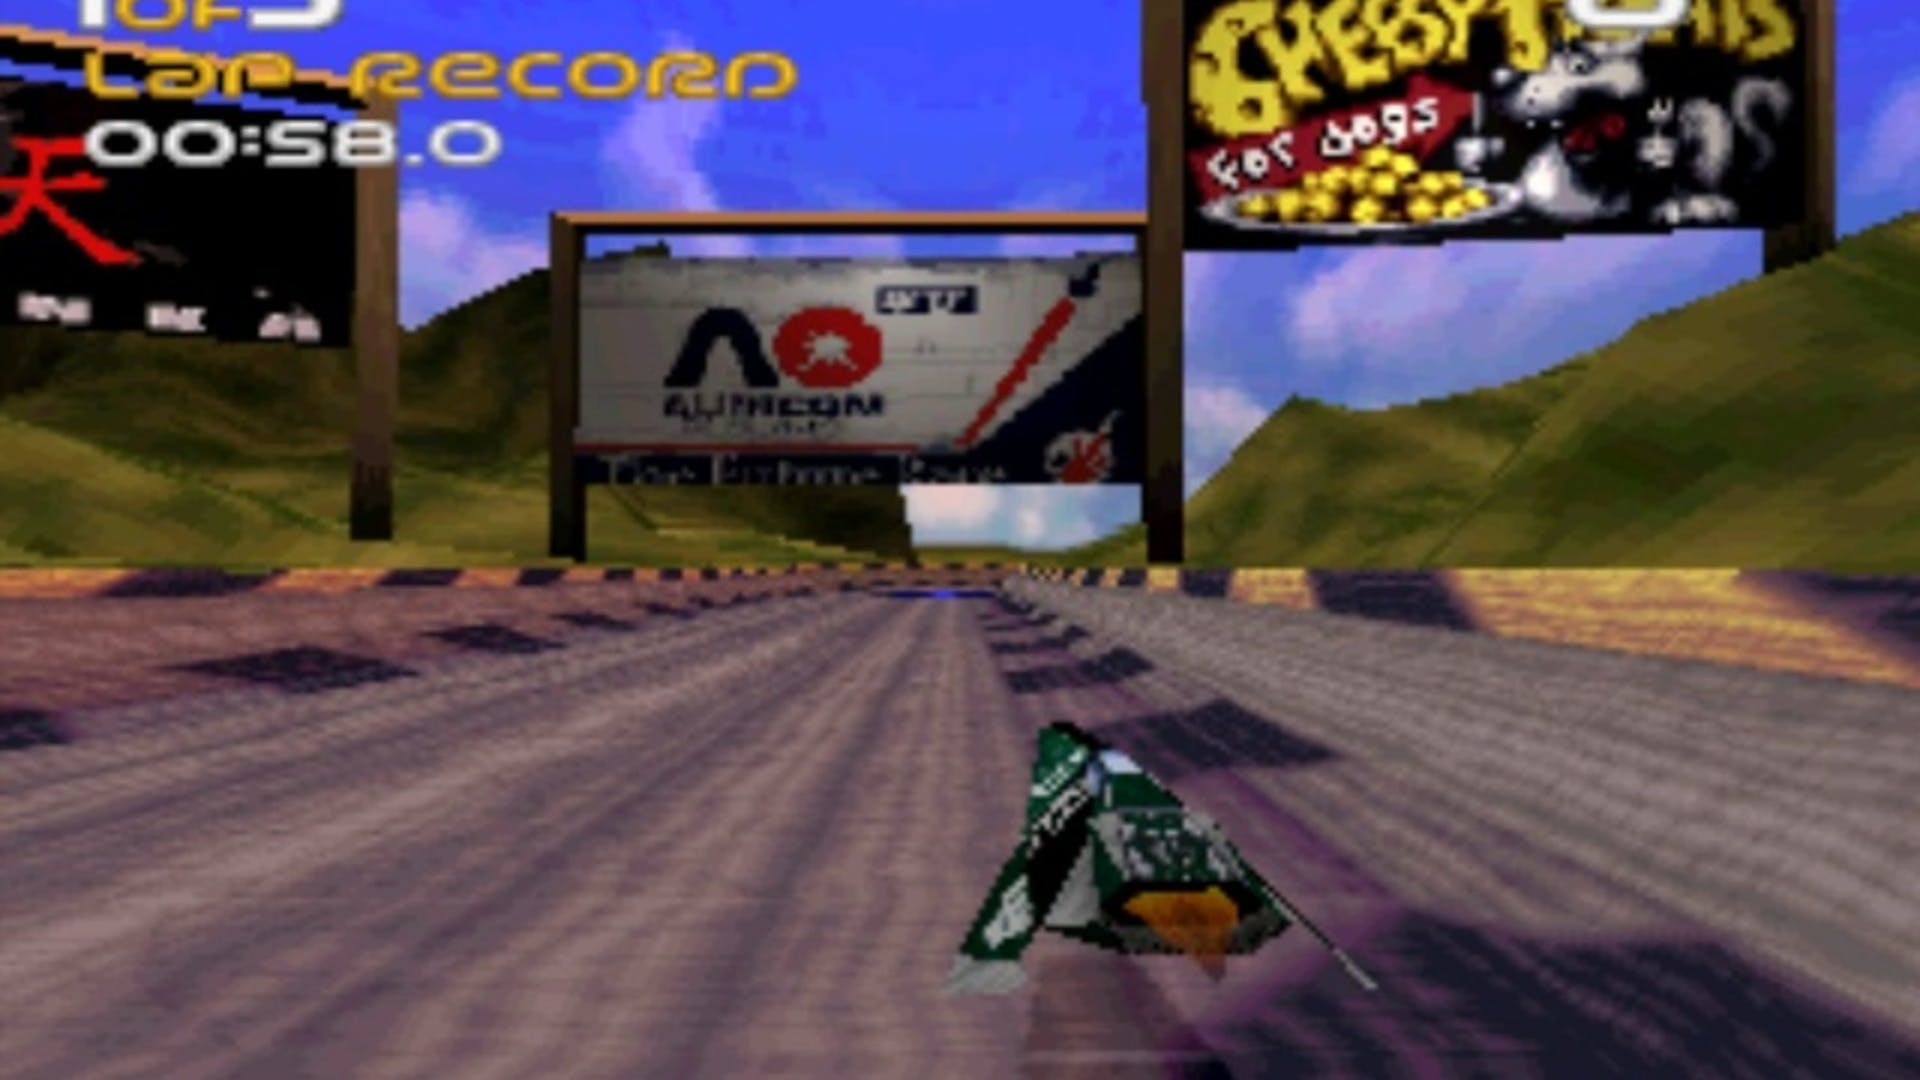 Wipeout ps1. Wipeout 1995. Wipeout ps1 диск. Время игры 1995